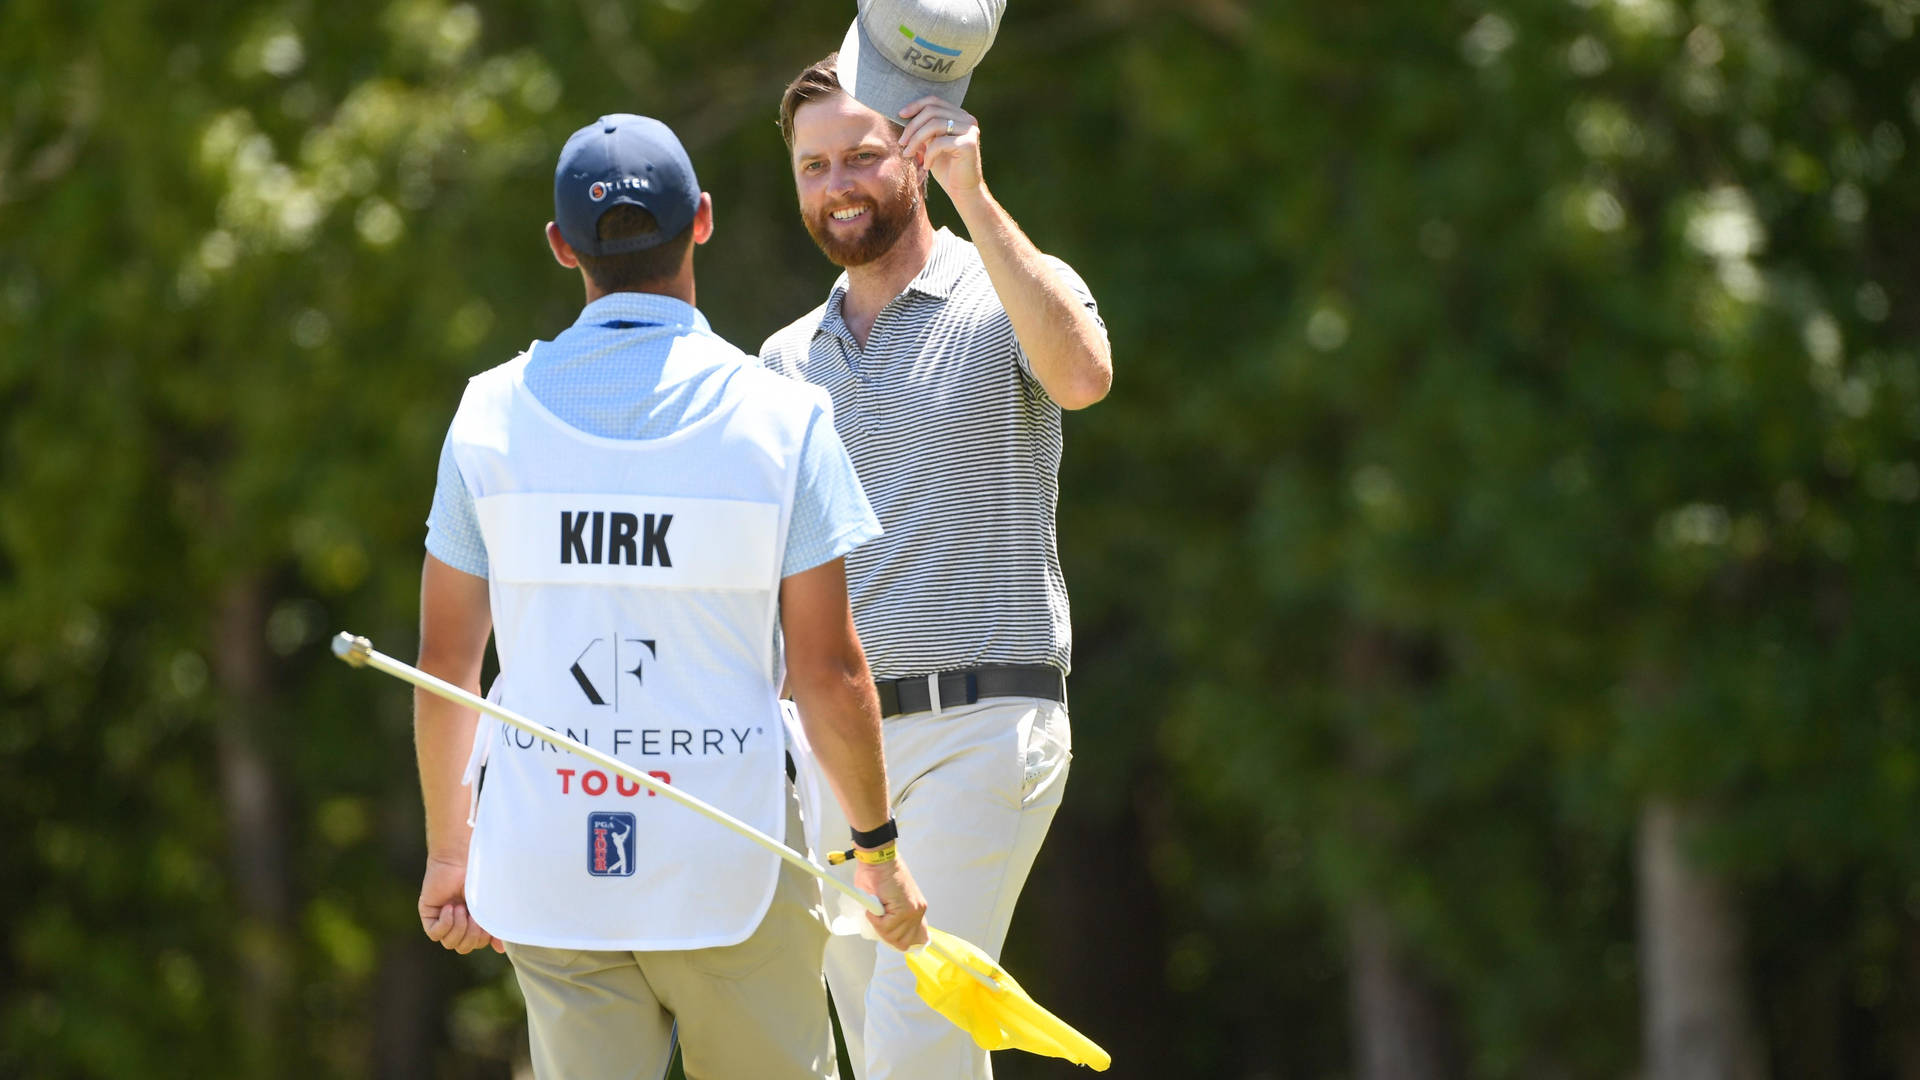 Professional golfer Chris Kirk in conversation with his caddie during a golf tournament Wallpaper